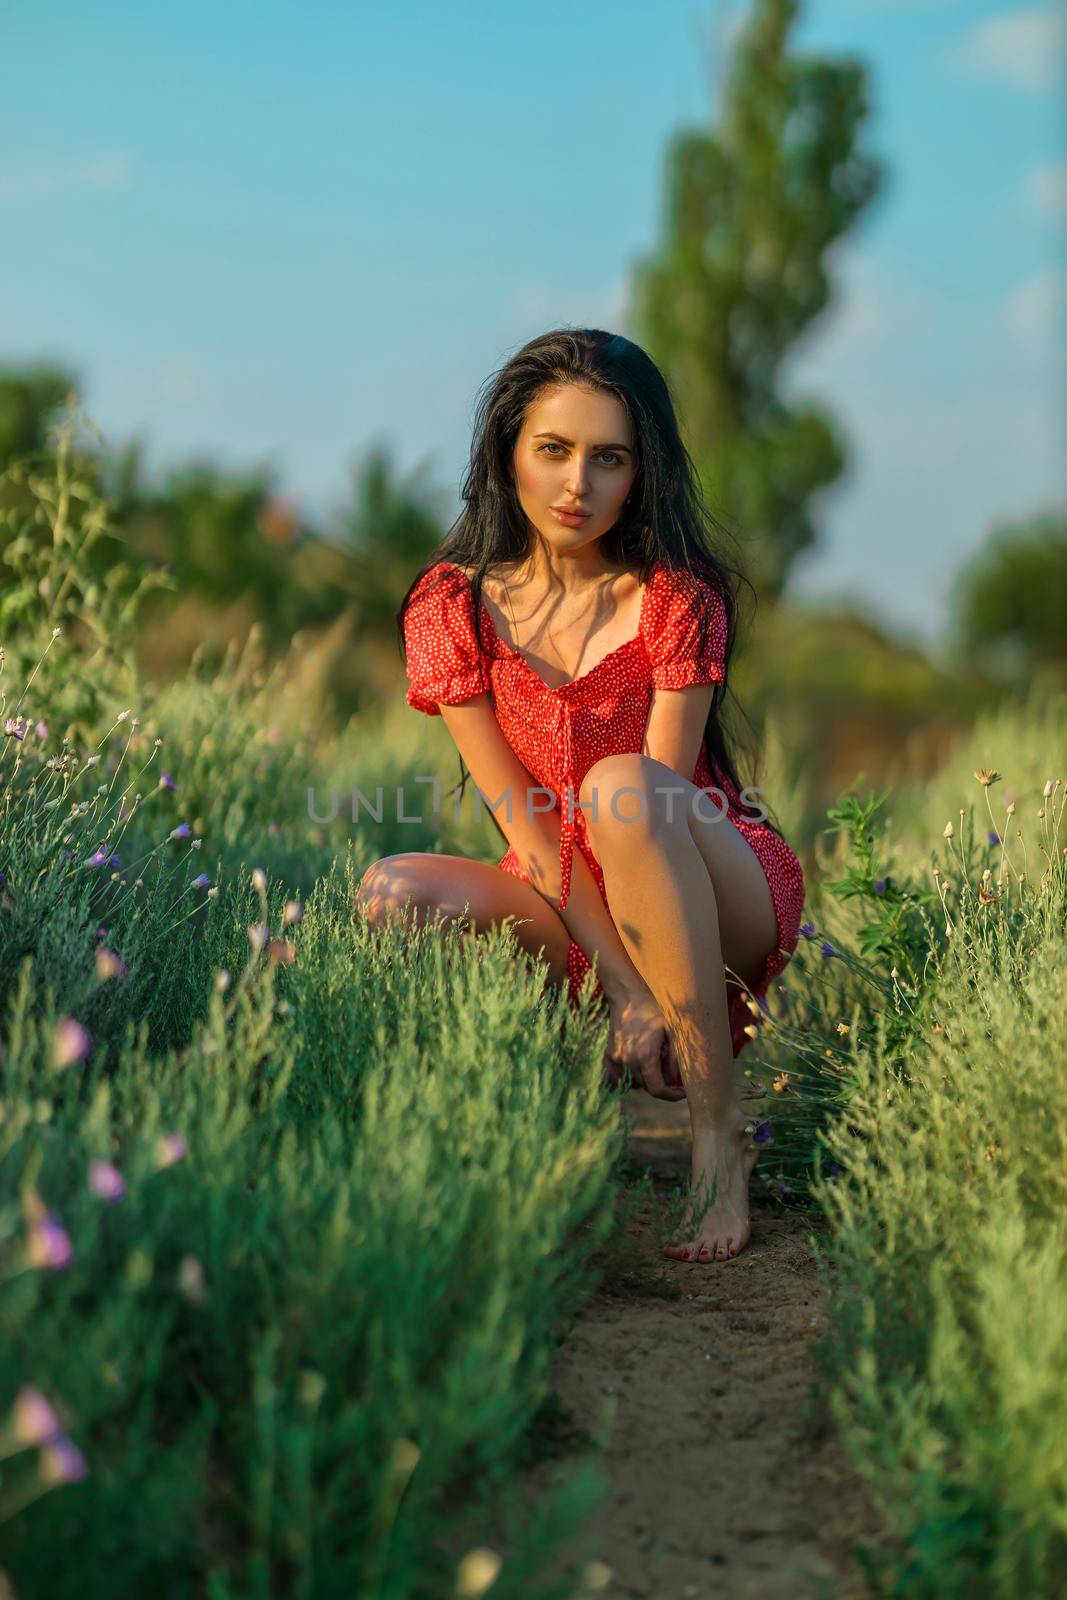 Beautiful girl in a red dress with small white polka dots posing in a meadow by but_photo